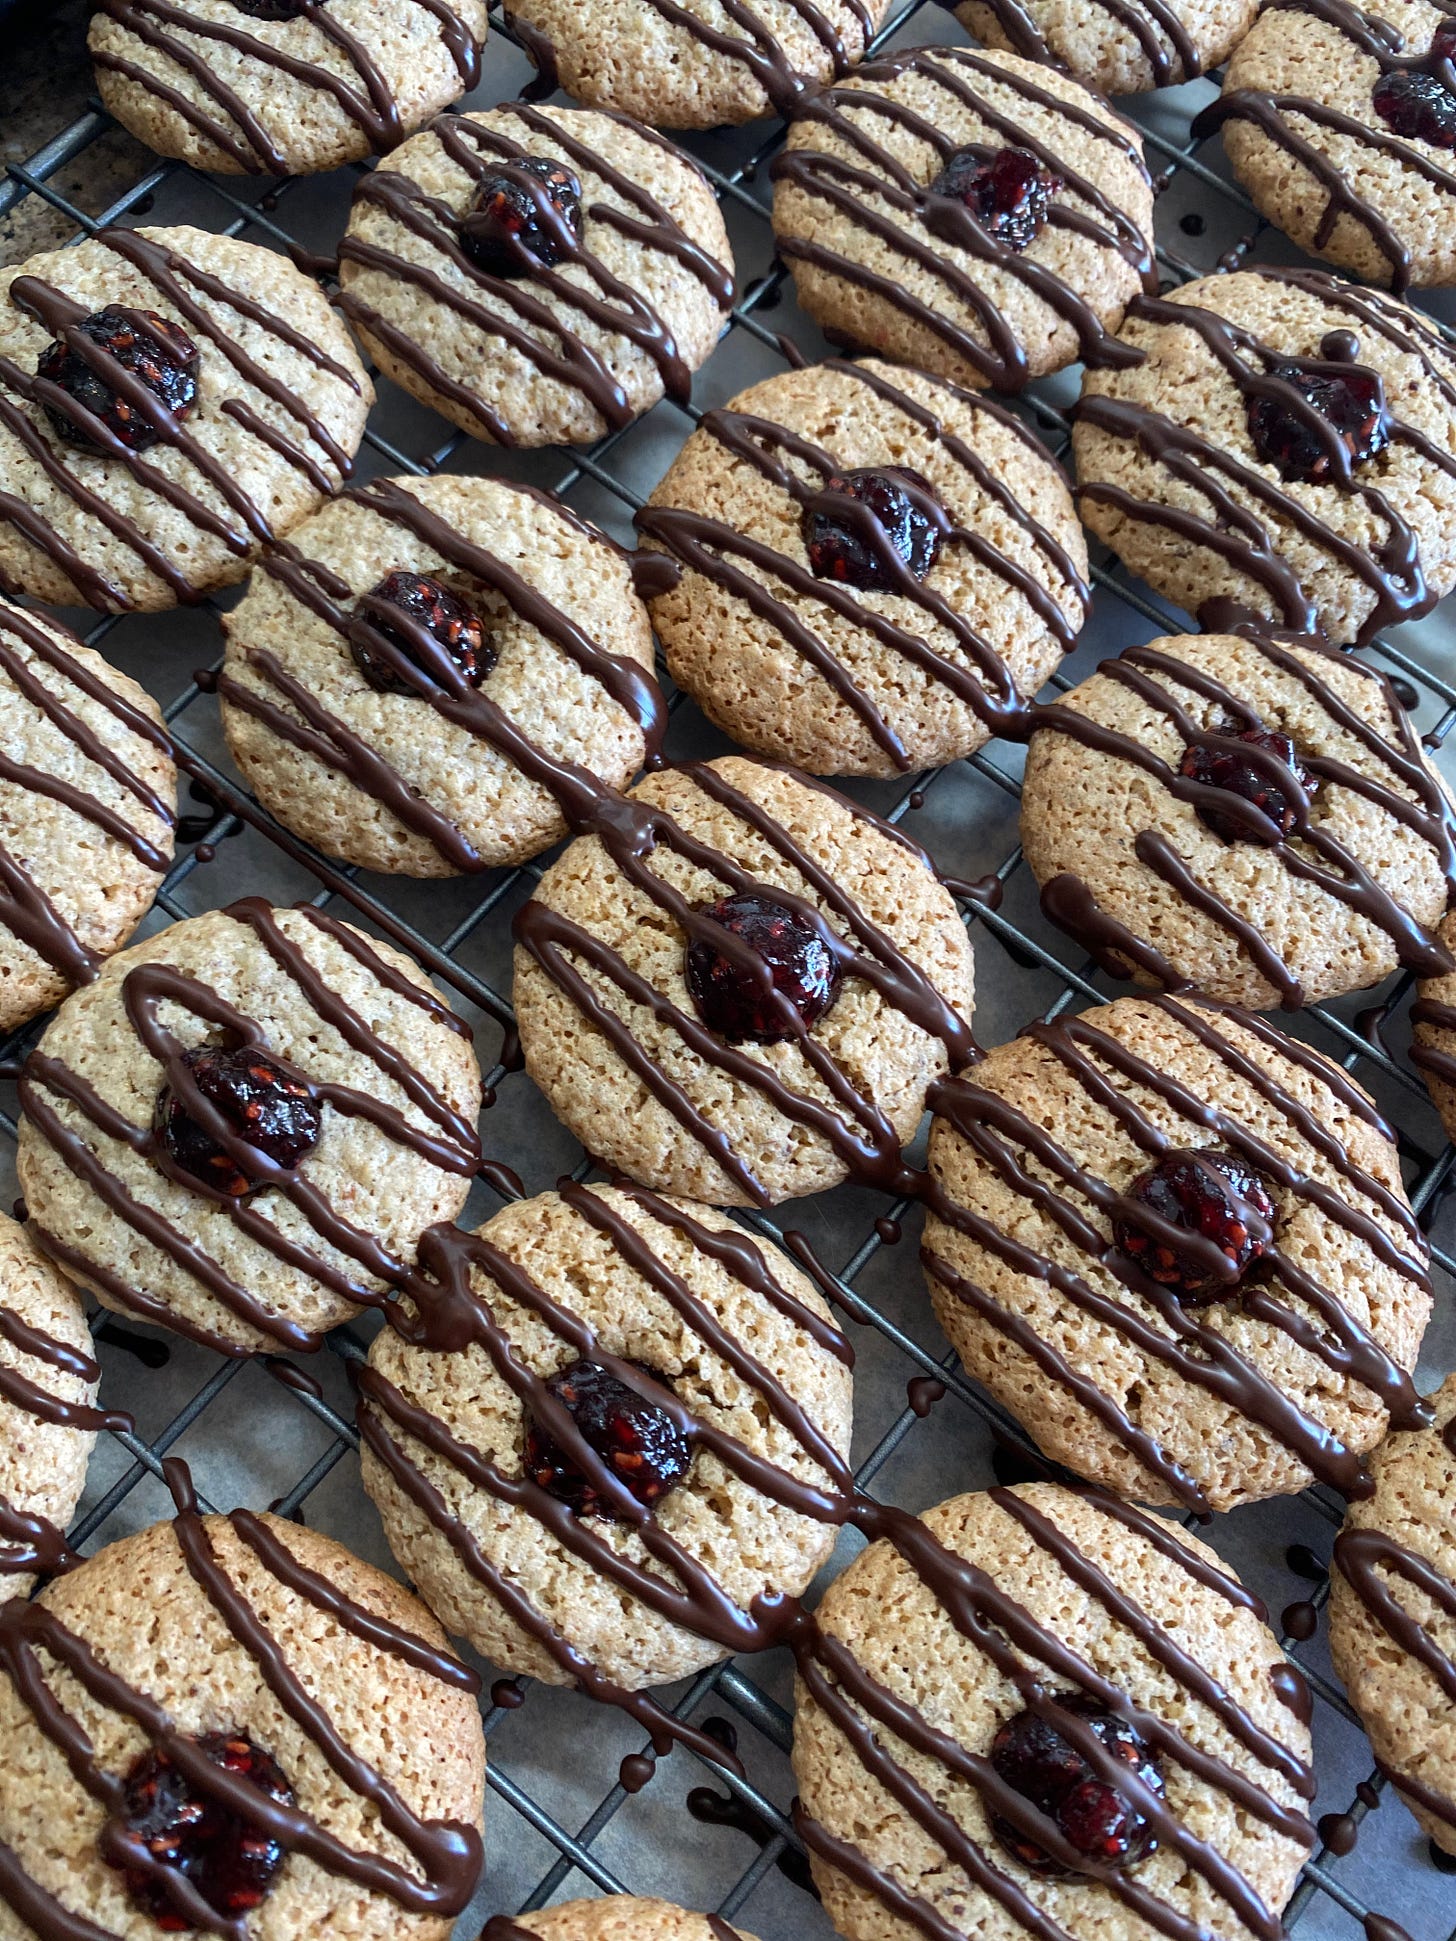 Many pale round cookies sit on a metal cooling rack. They have small dollops of raspberry jam in their centers, and are drizzled with zigzagging lines of chocolate ganache.